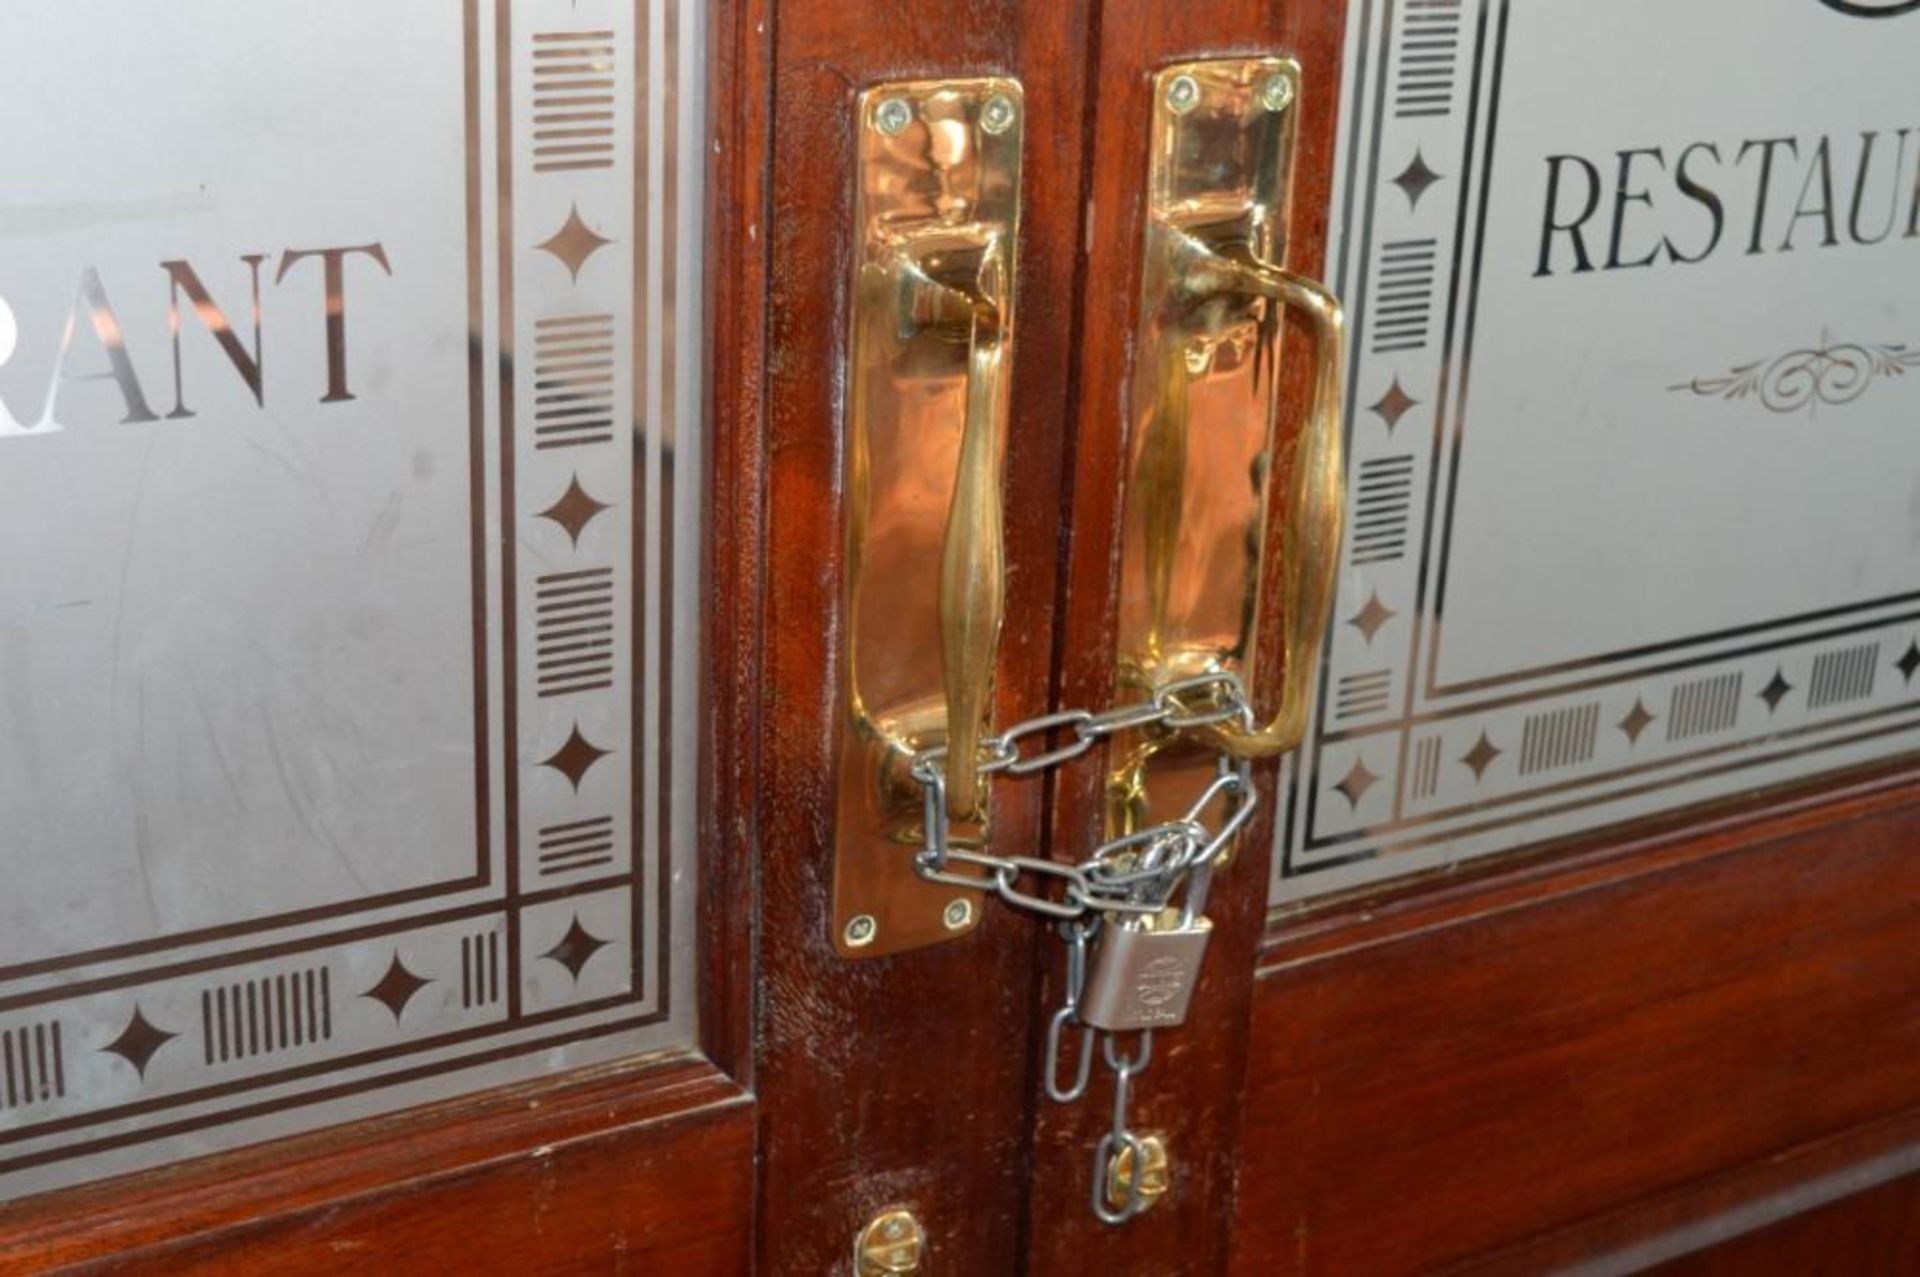 1 x Set of Double Doors With Surround - Smithhursts Restaurant and Bar - Includes Brass Hardware - H - Image 7 of 7